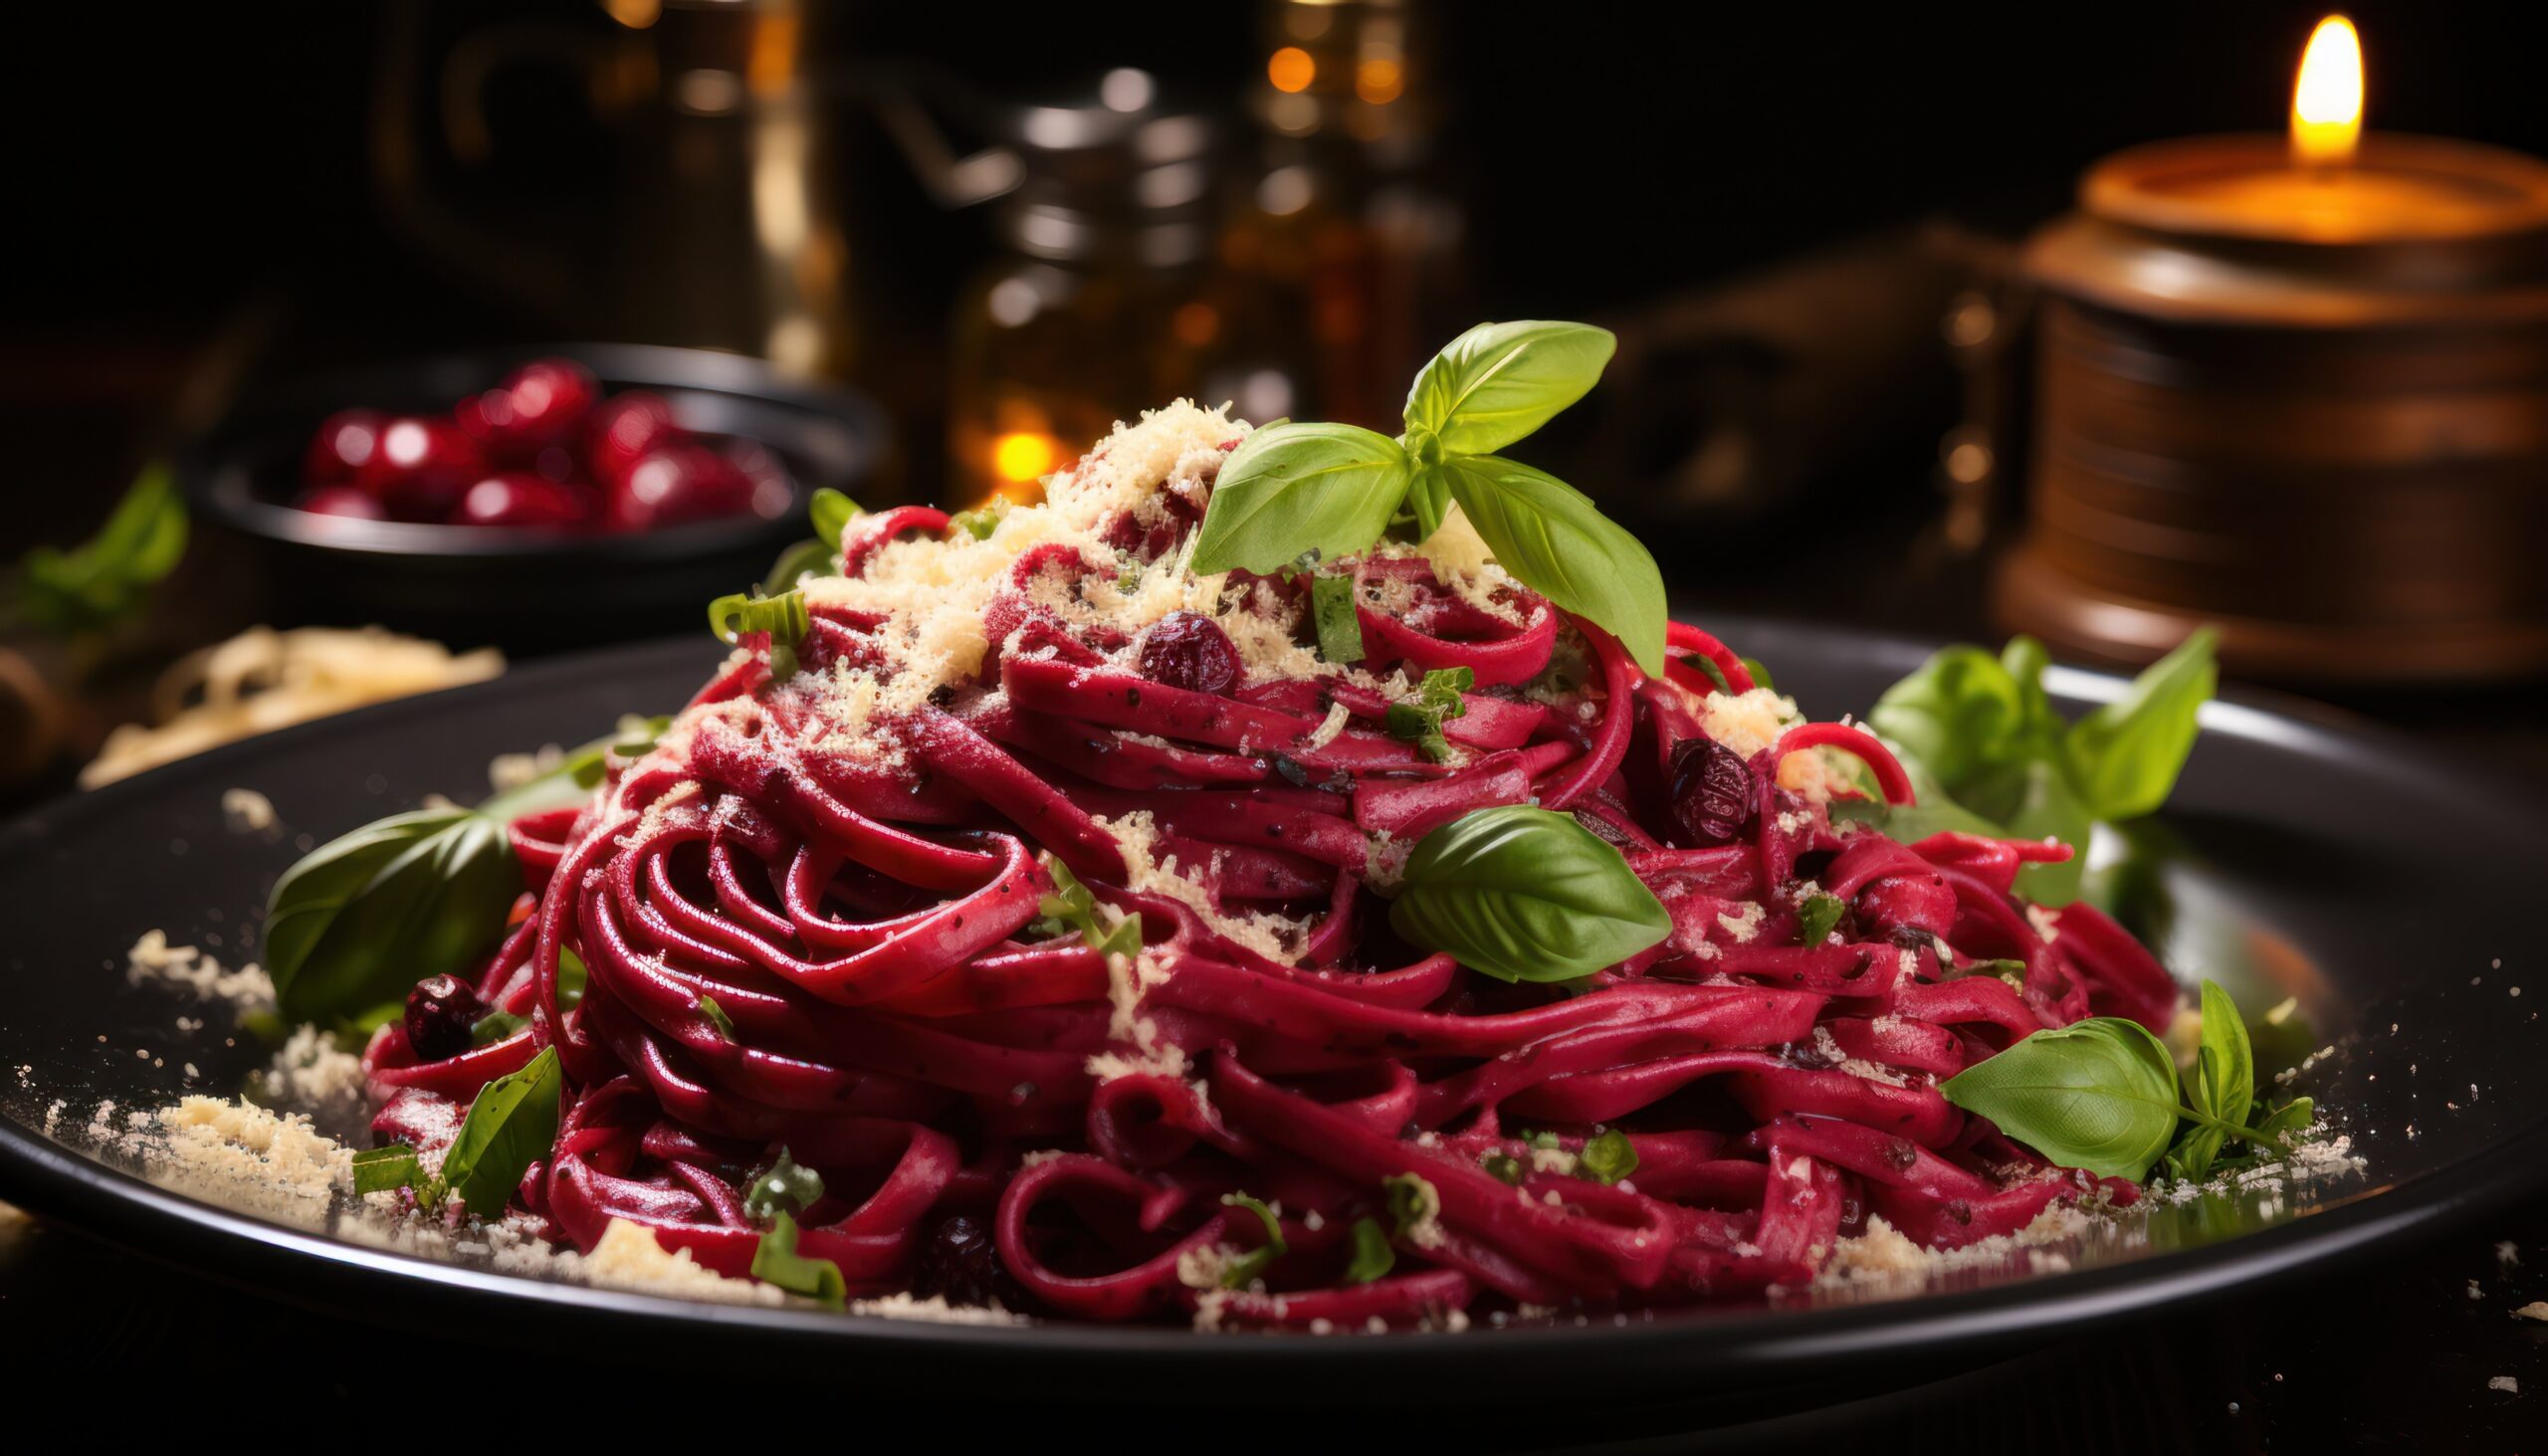 pasta with beets, cheese and herbs on a dark background. for a recipe book